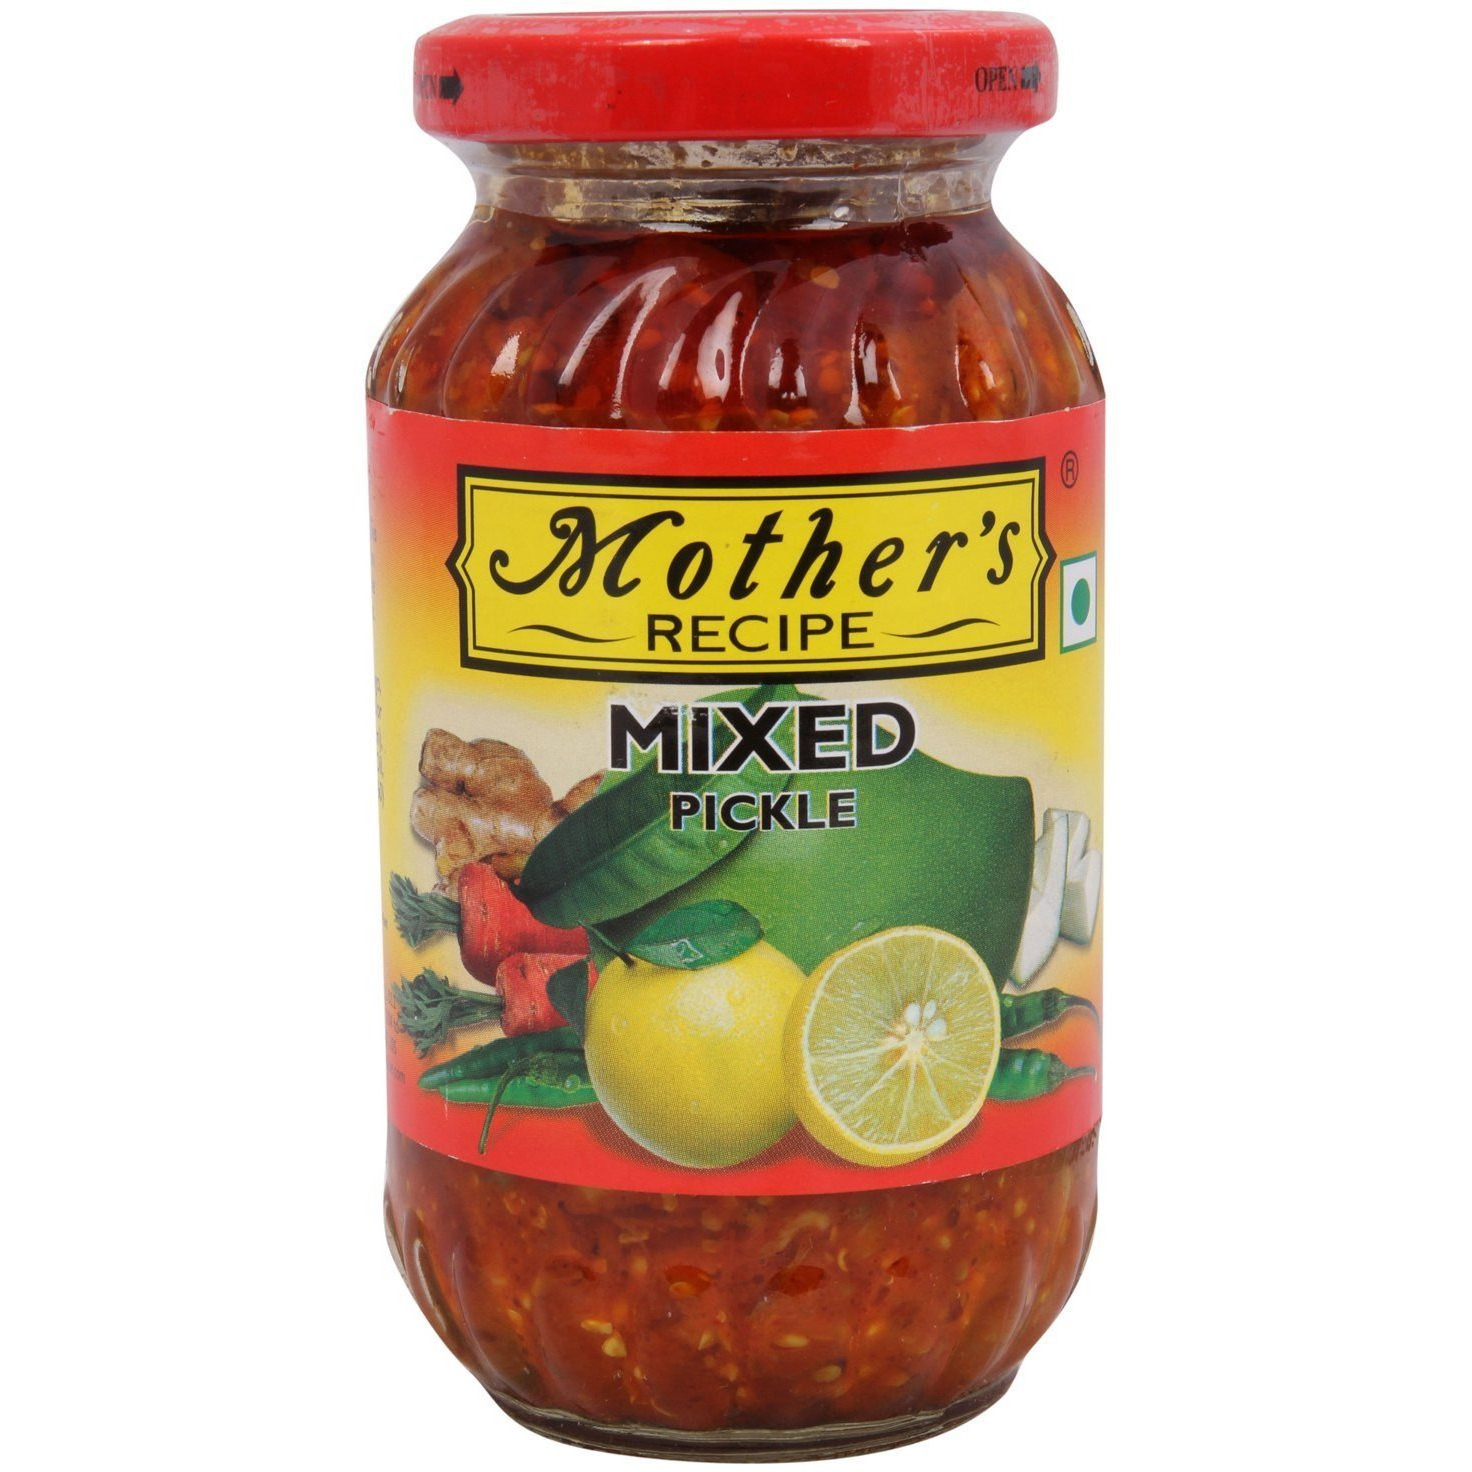 Mother's Recipe Mixed Pickle South Indian Style - 300 Gm (10.6 Oz) [Buy 1 Get 1 Free]